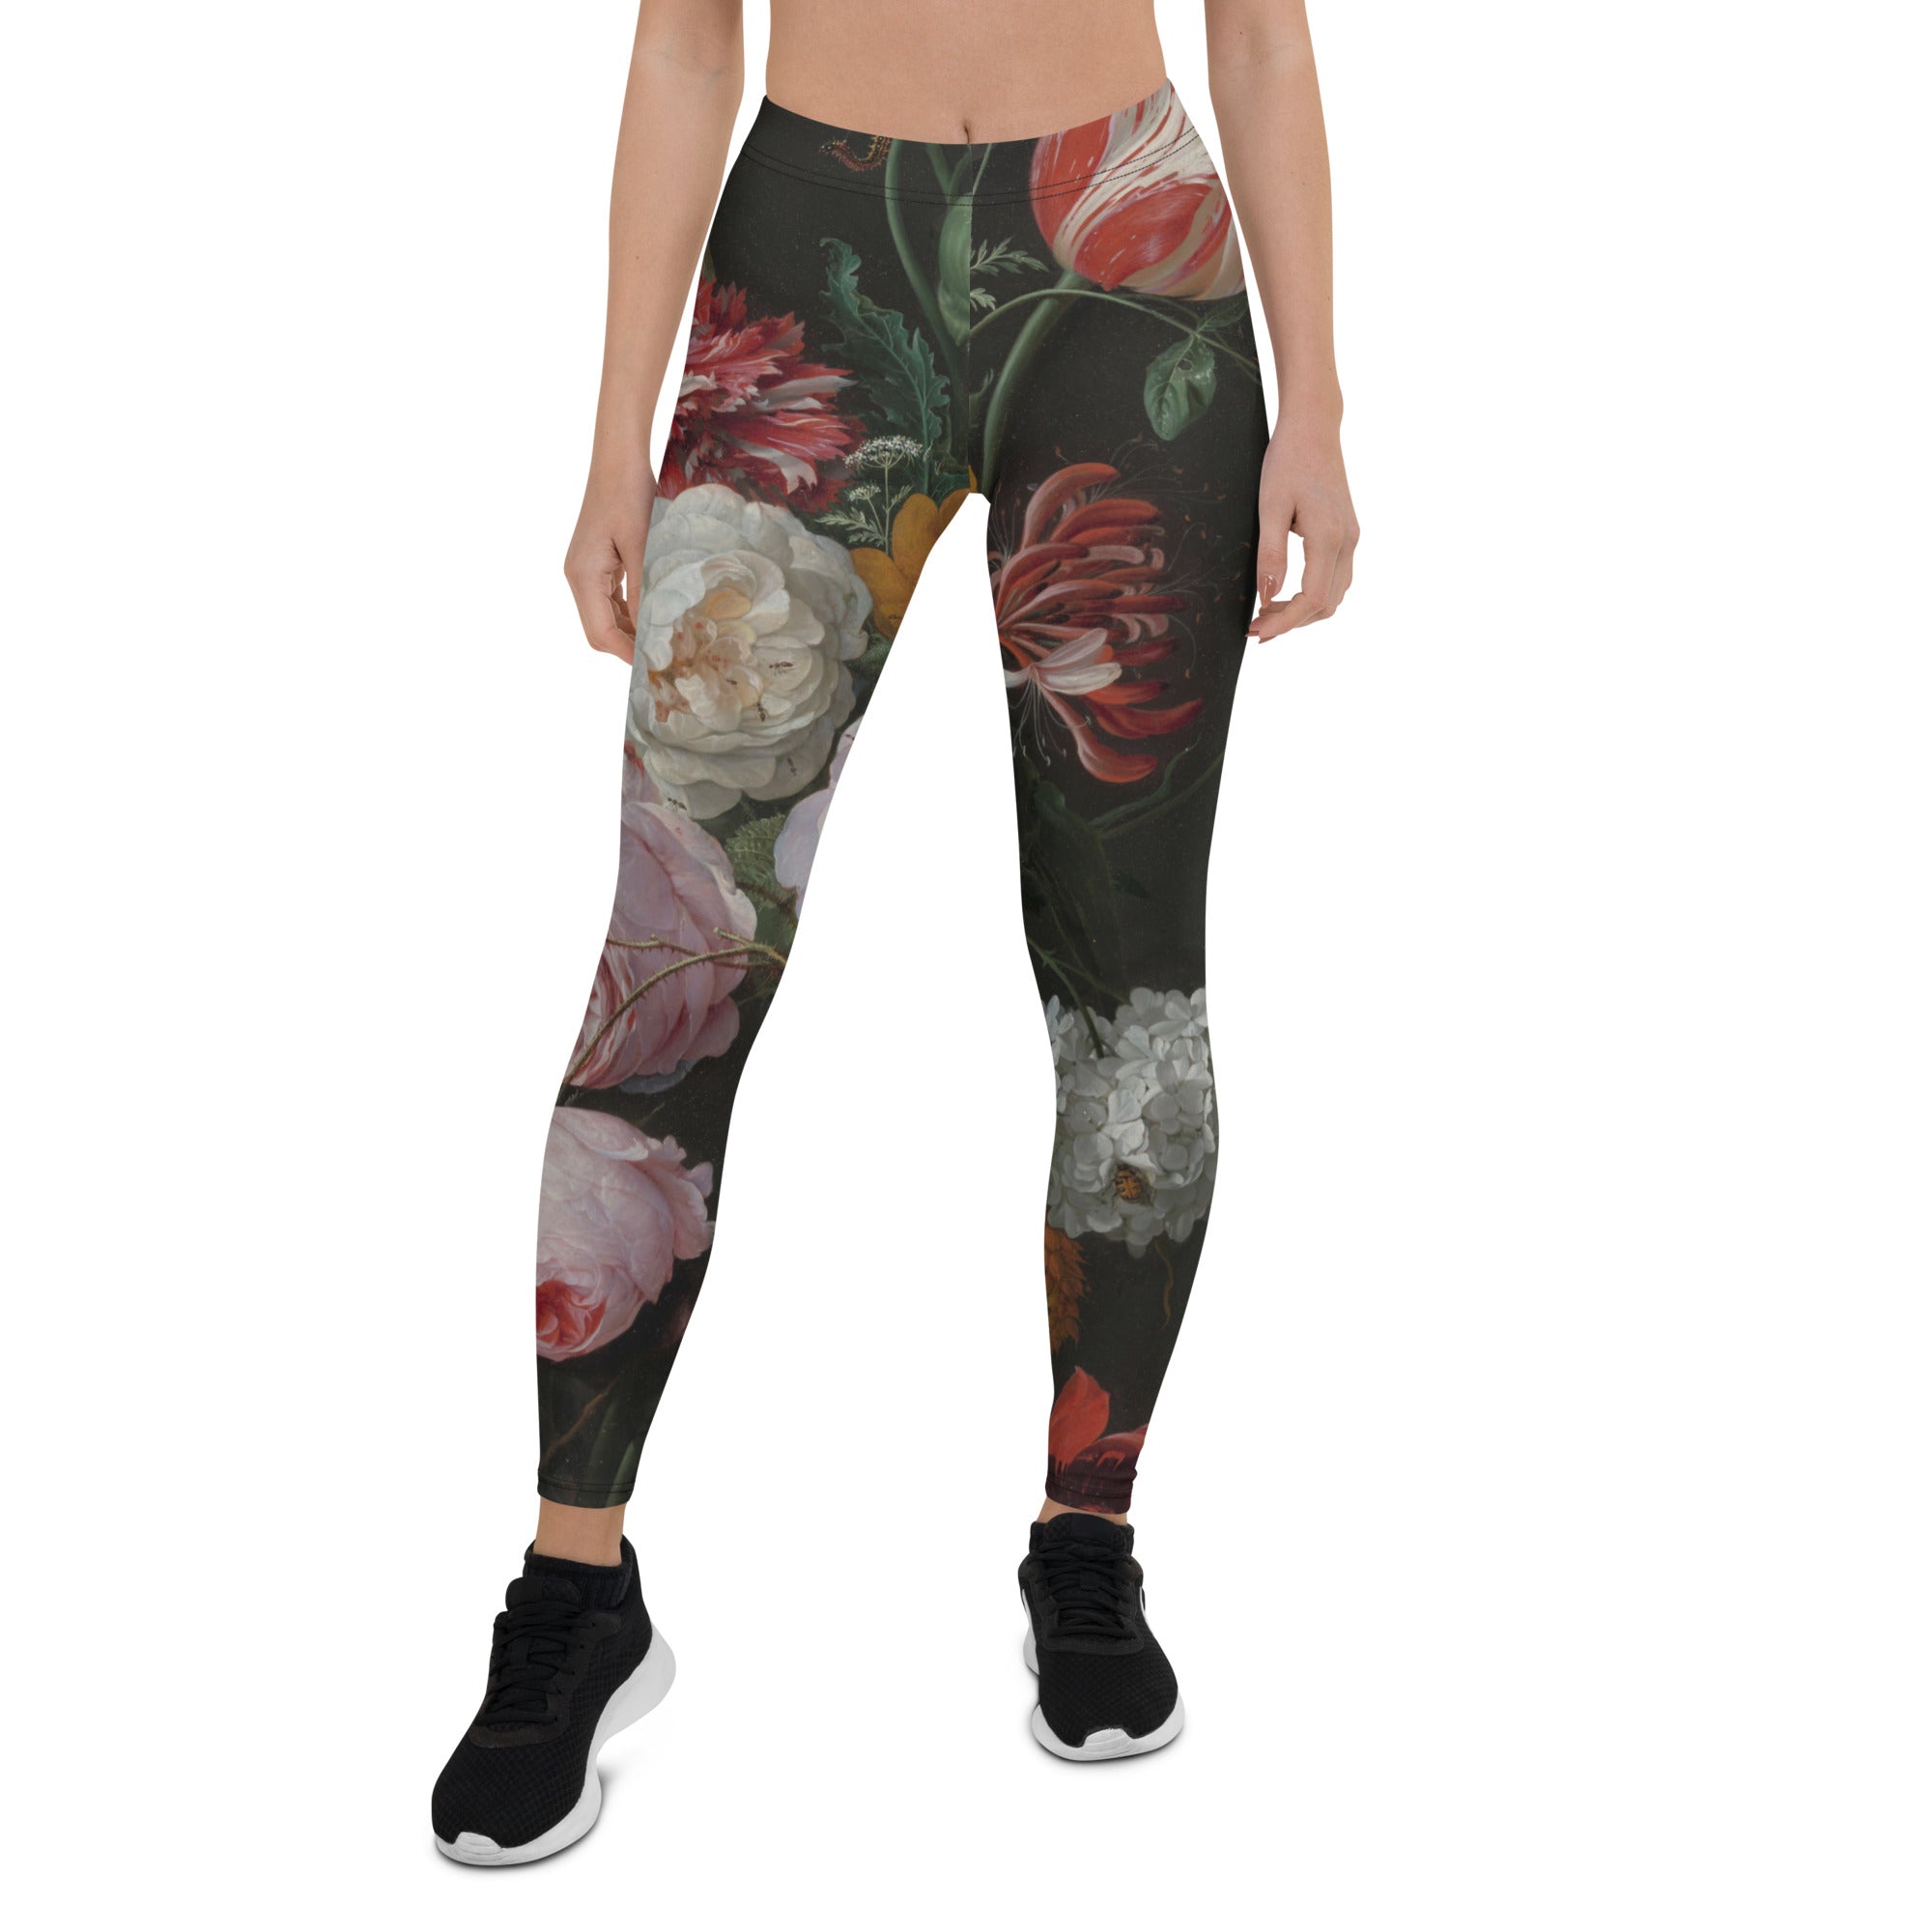 The Empowering Evolution of Leggings: A Journey with MyO2